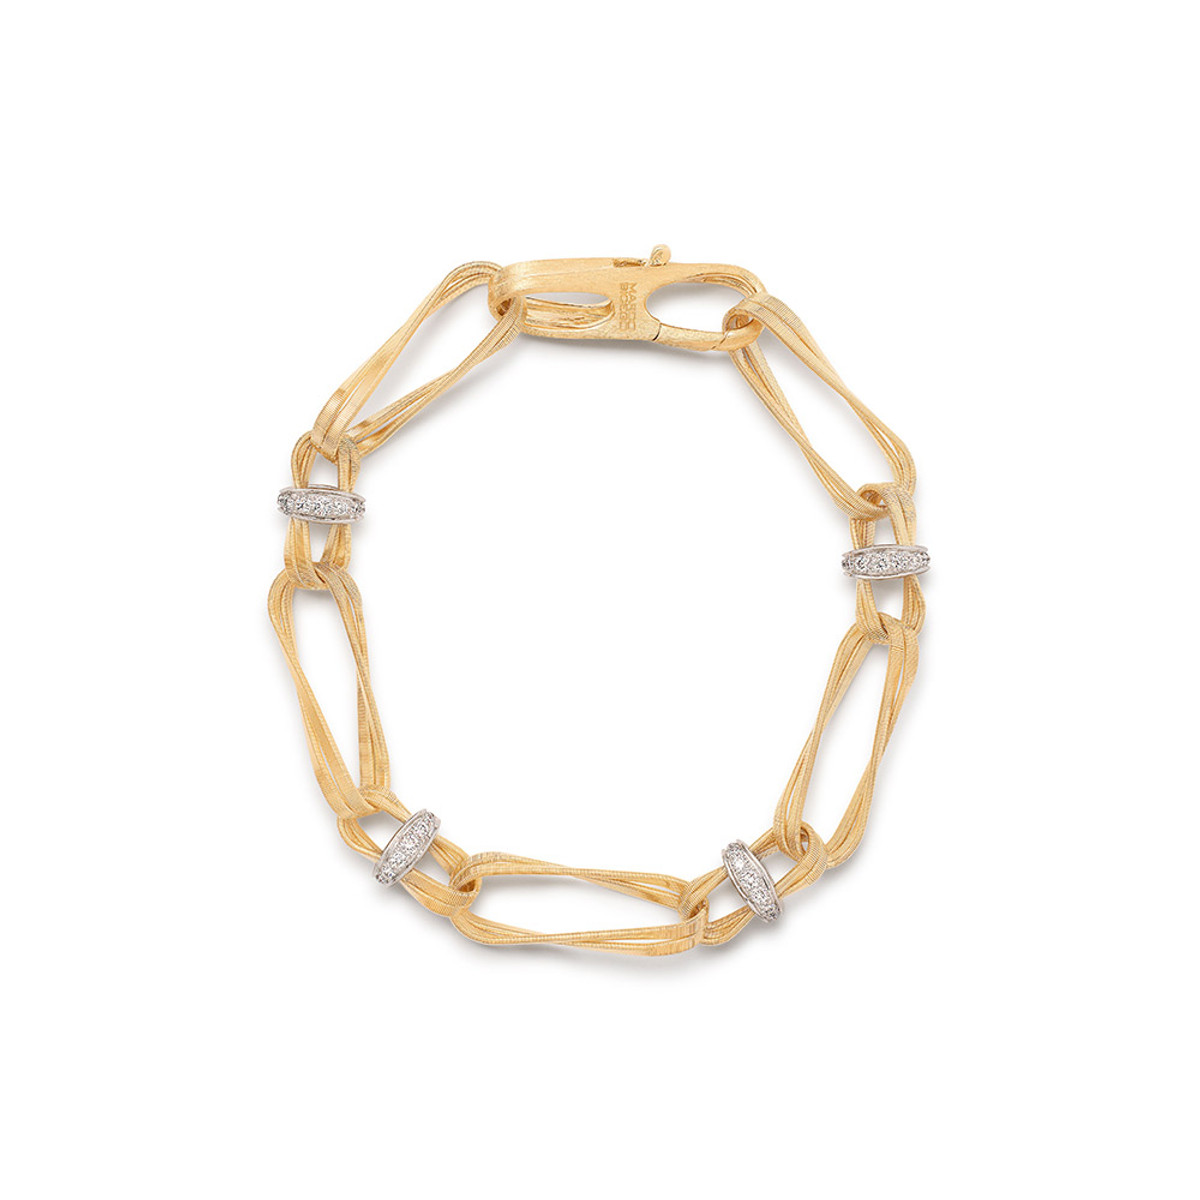 Marco Bicego Marrakech Collection 18K Yellow Gold  Bangle-54411 Product Image